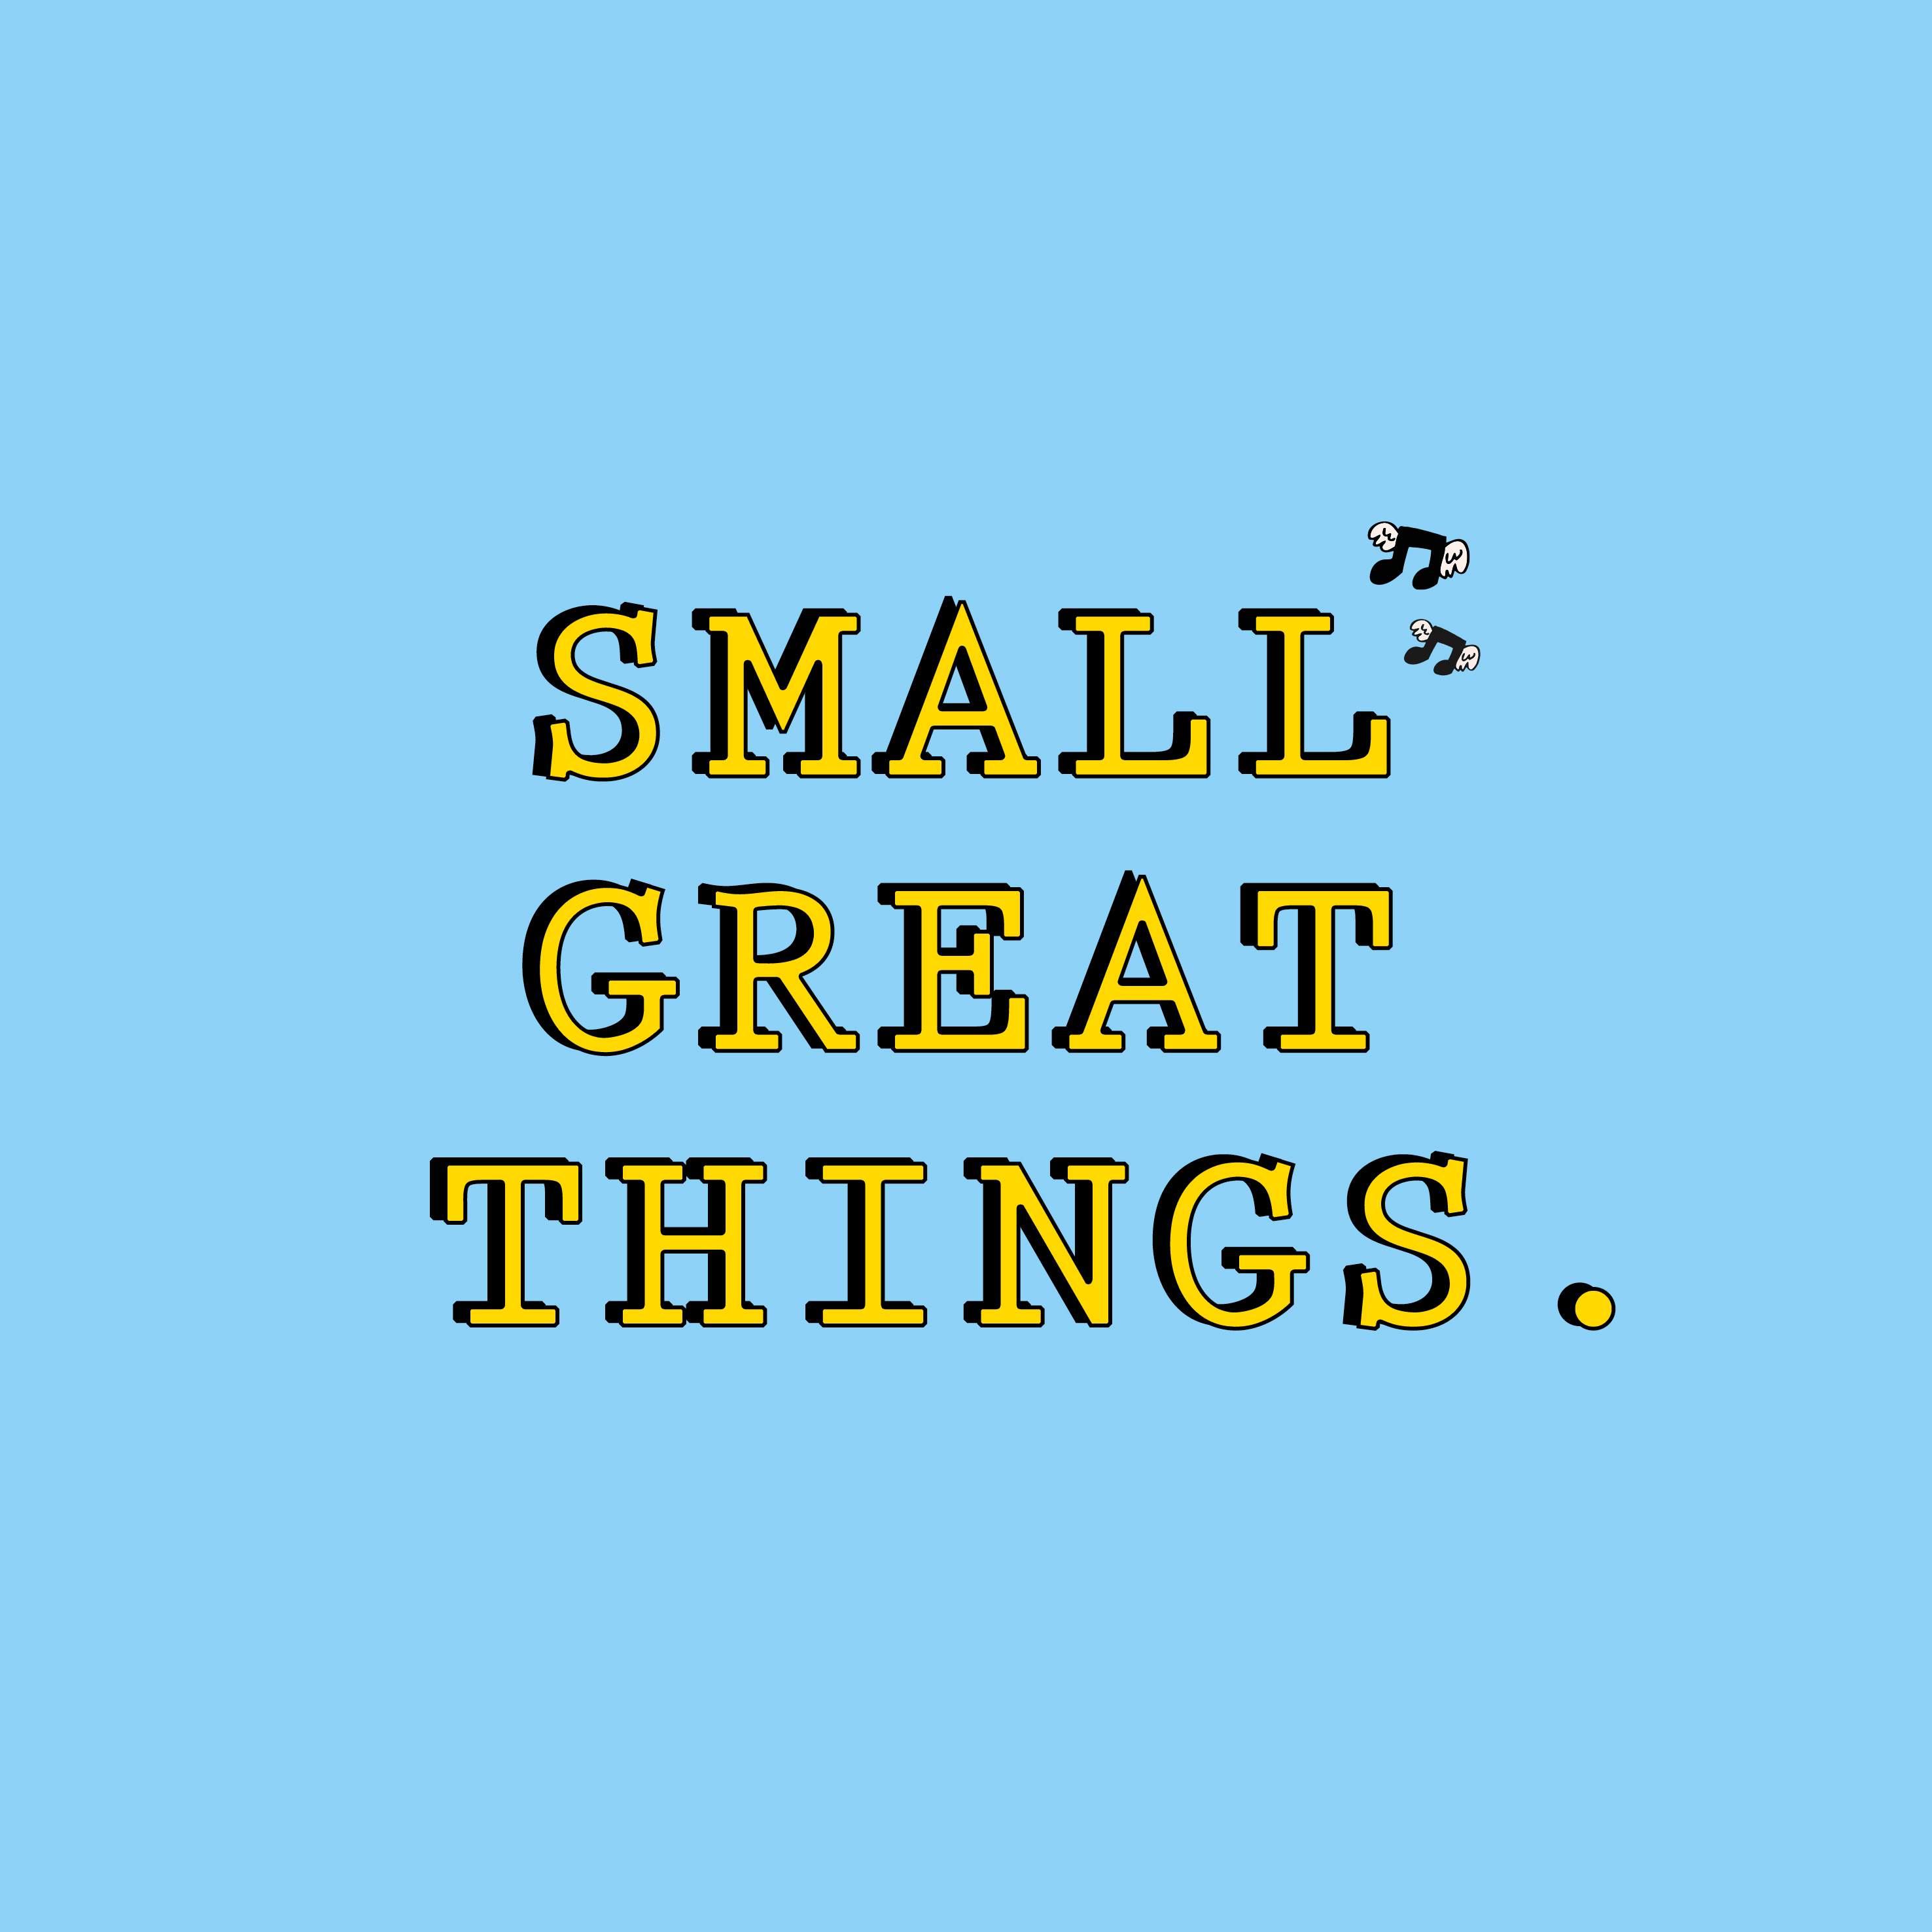 Small Great House (Small Great Things) - フライヤー表